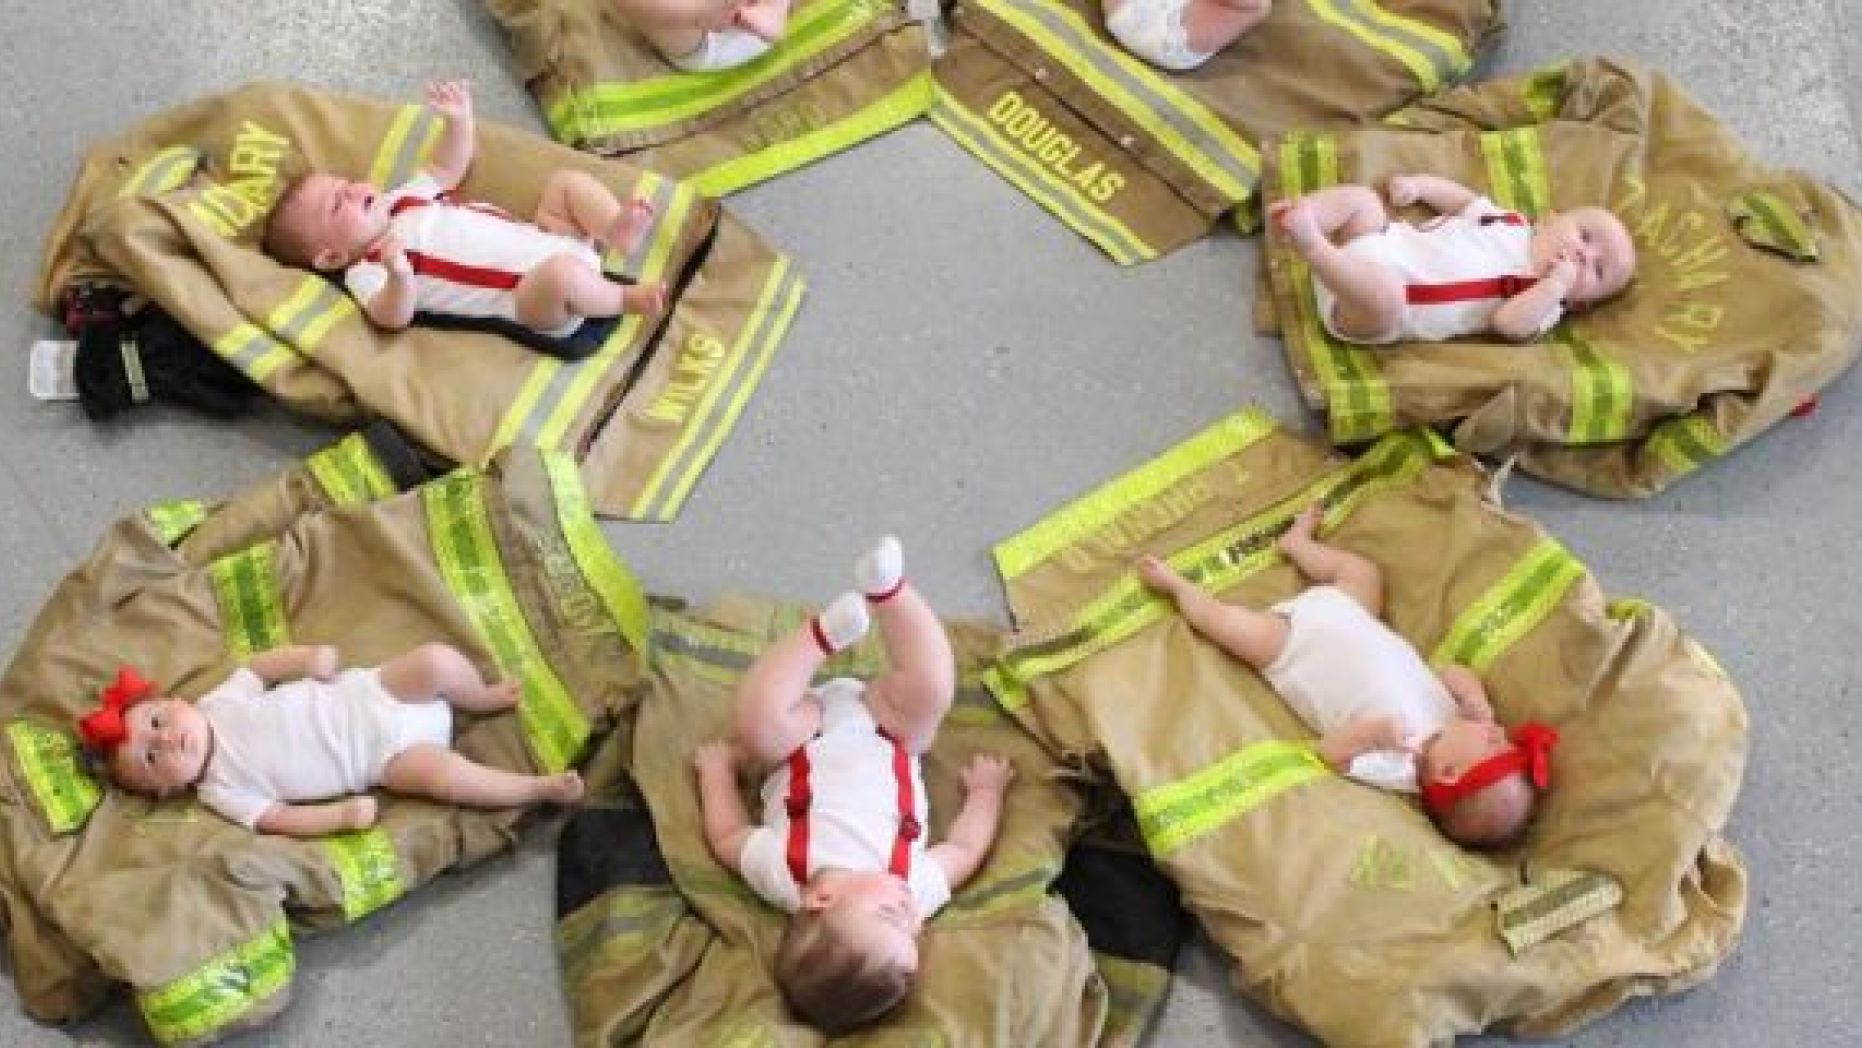 Louisiana's Zachary Fire Department announced its crew welcomed seven babies during the last 11 months.